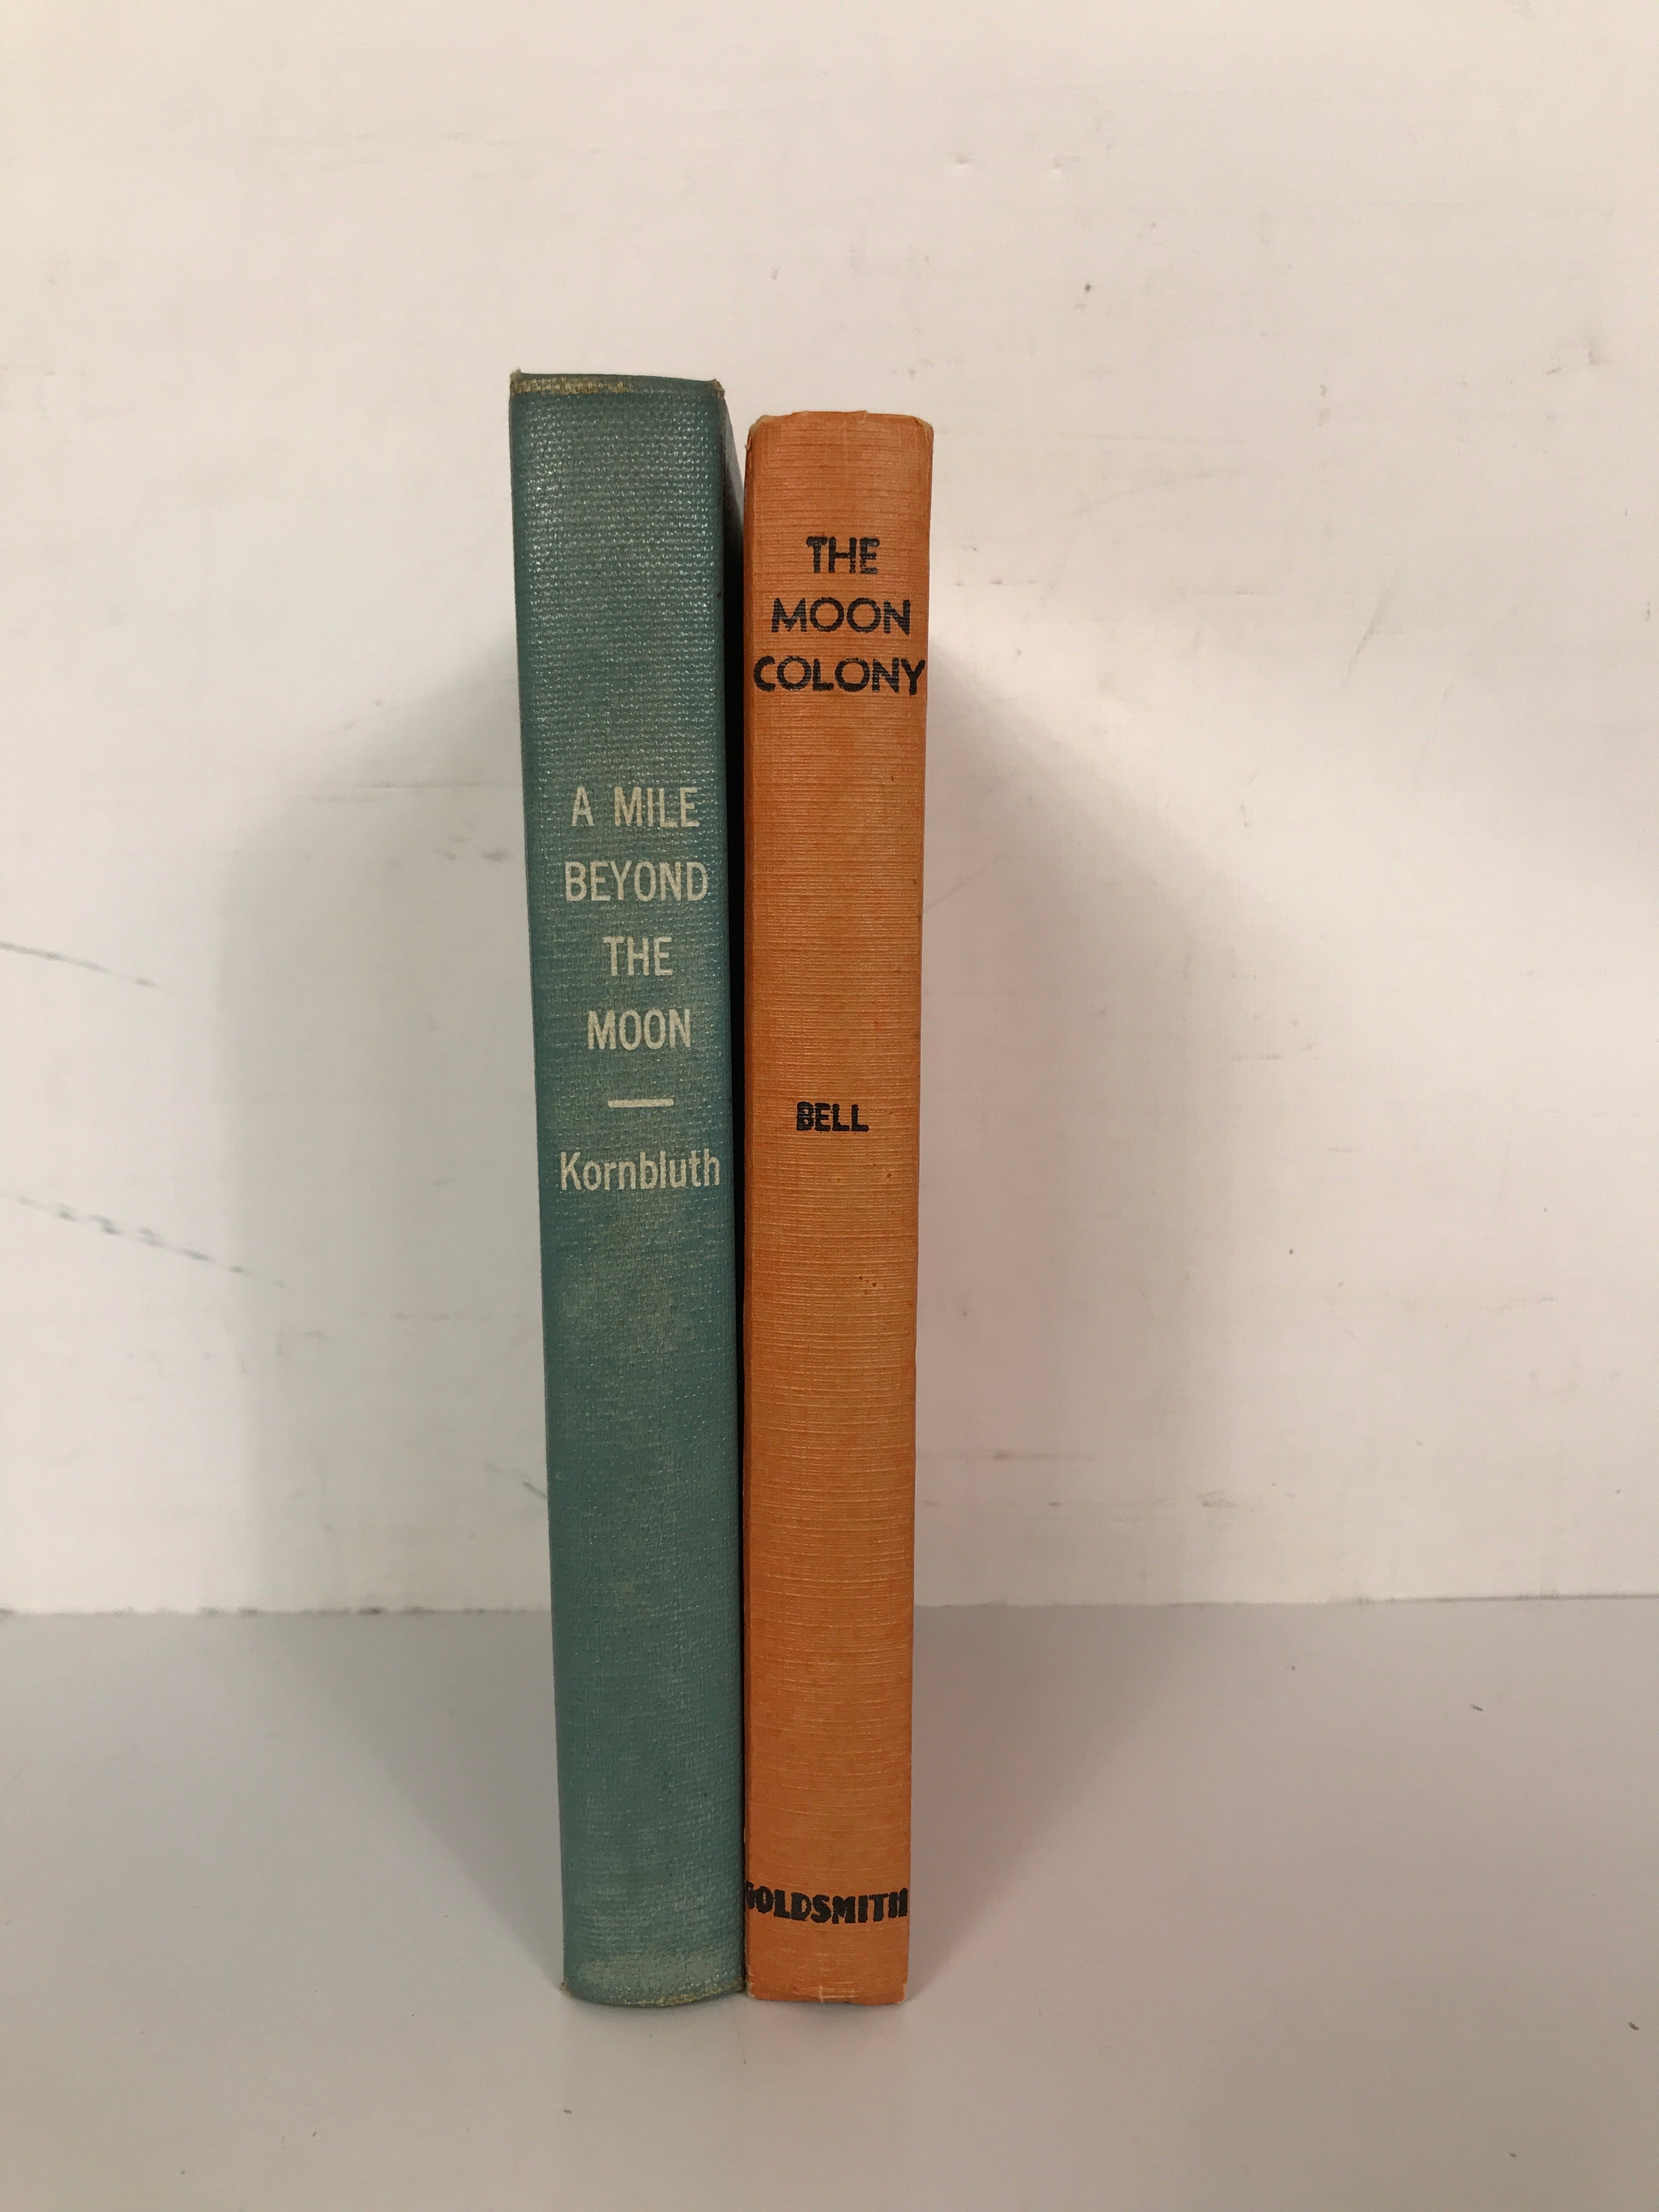 Lot of 2 Science Fiction: The Moon Colony 1937/A Mile Beyond the Moon 1958 HC